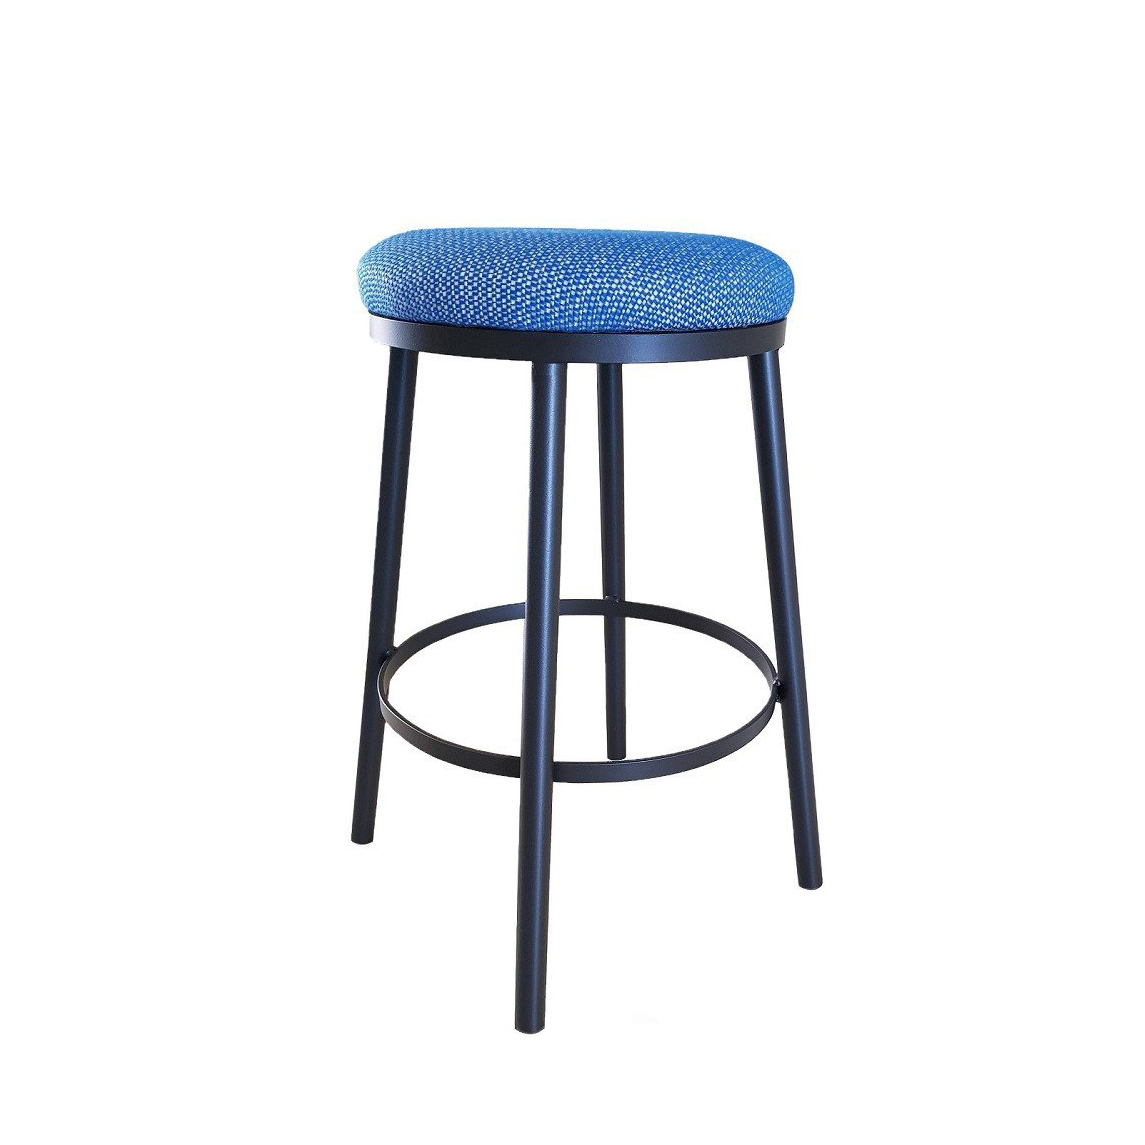 Deck Round Stool with Upholstery